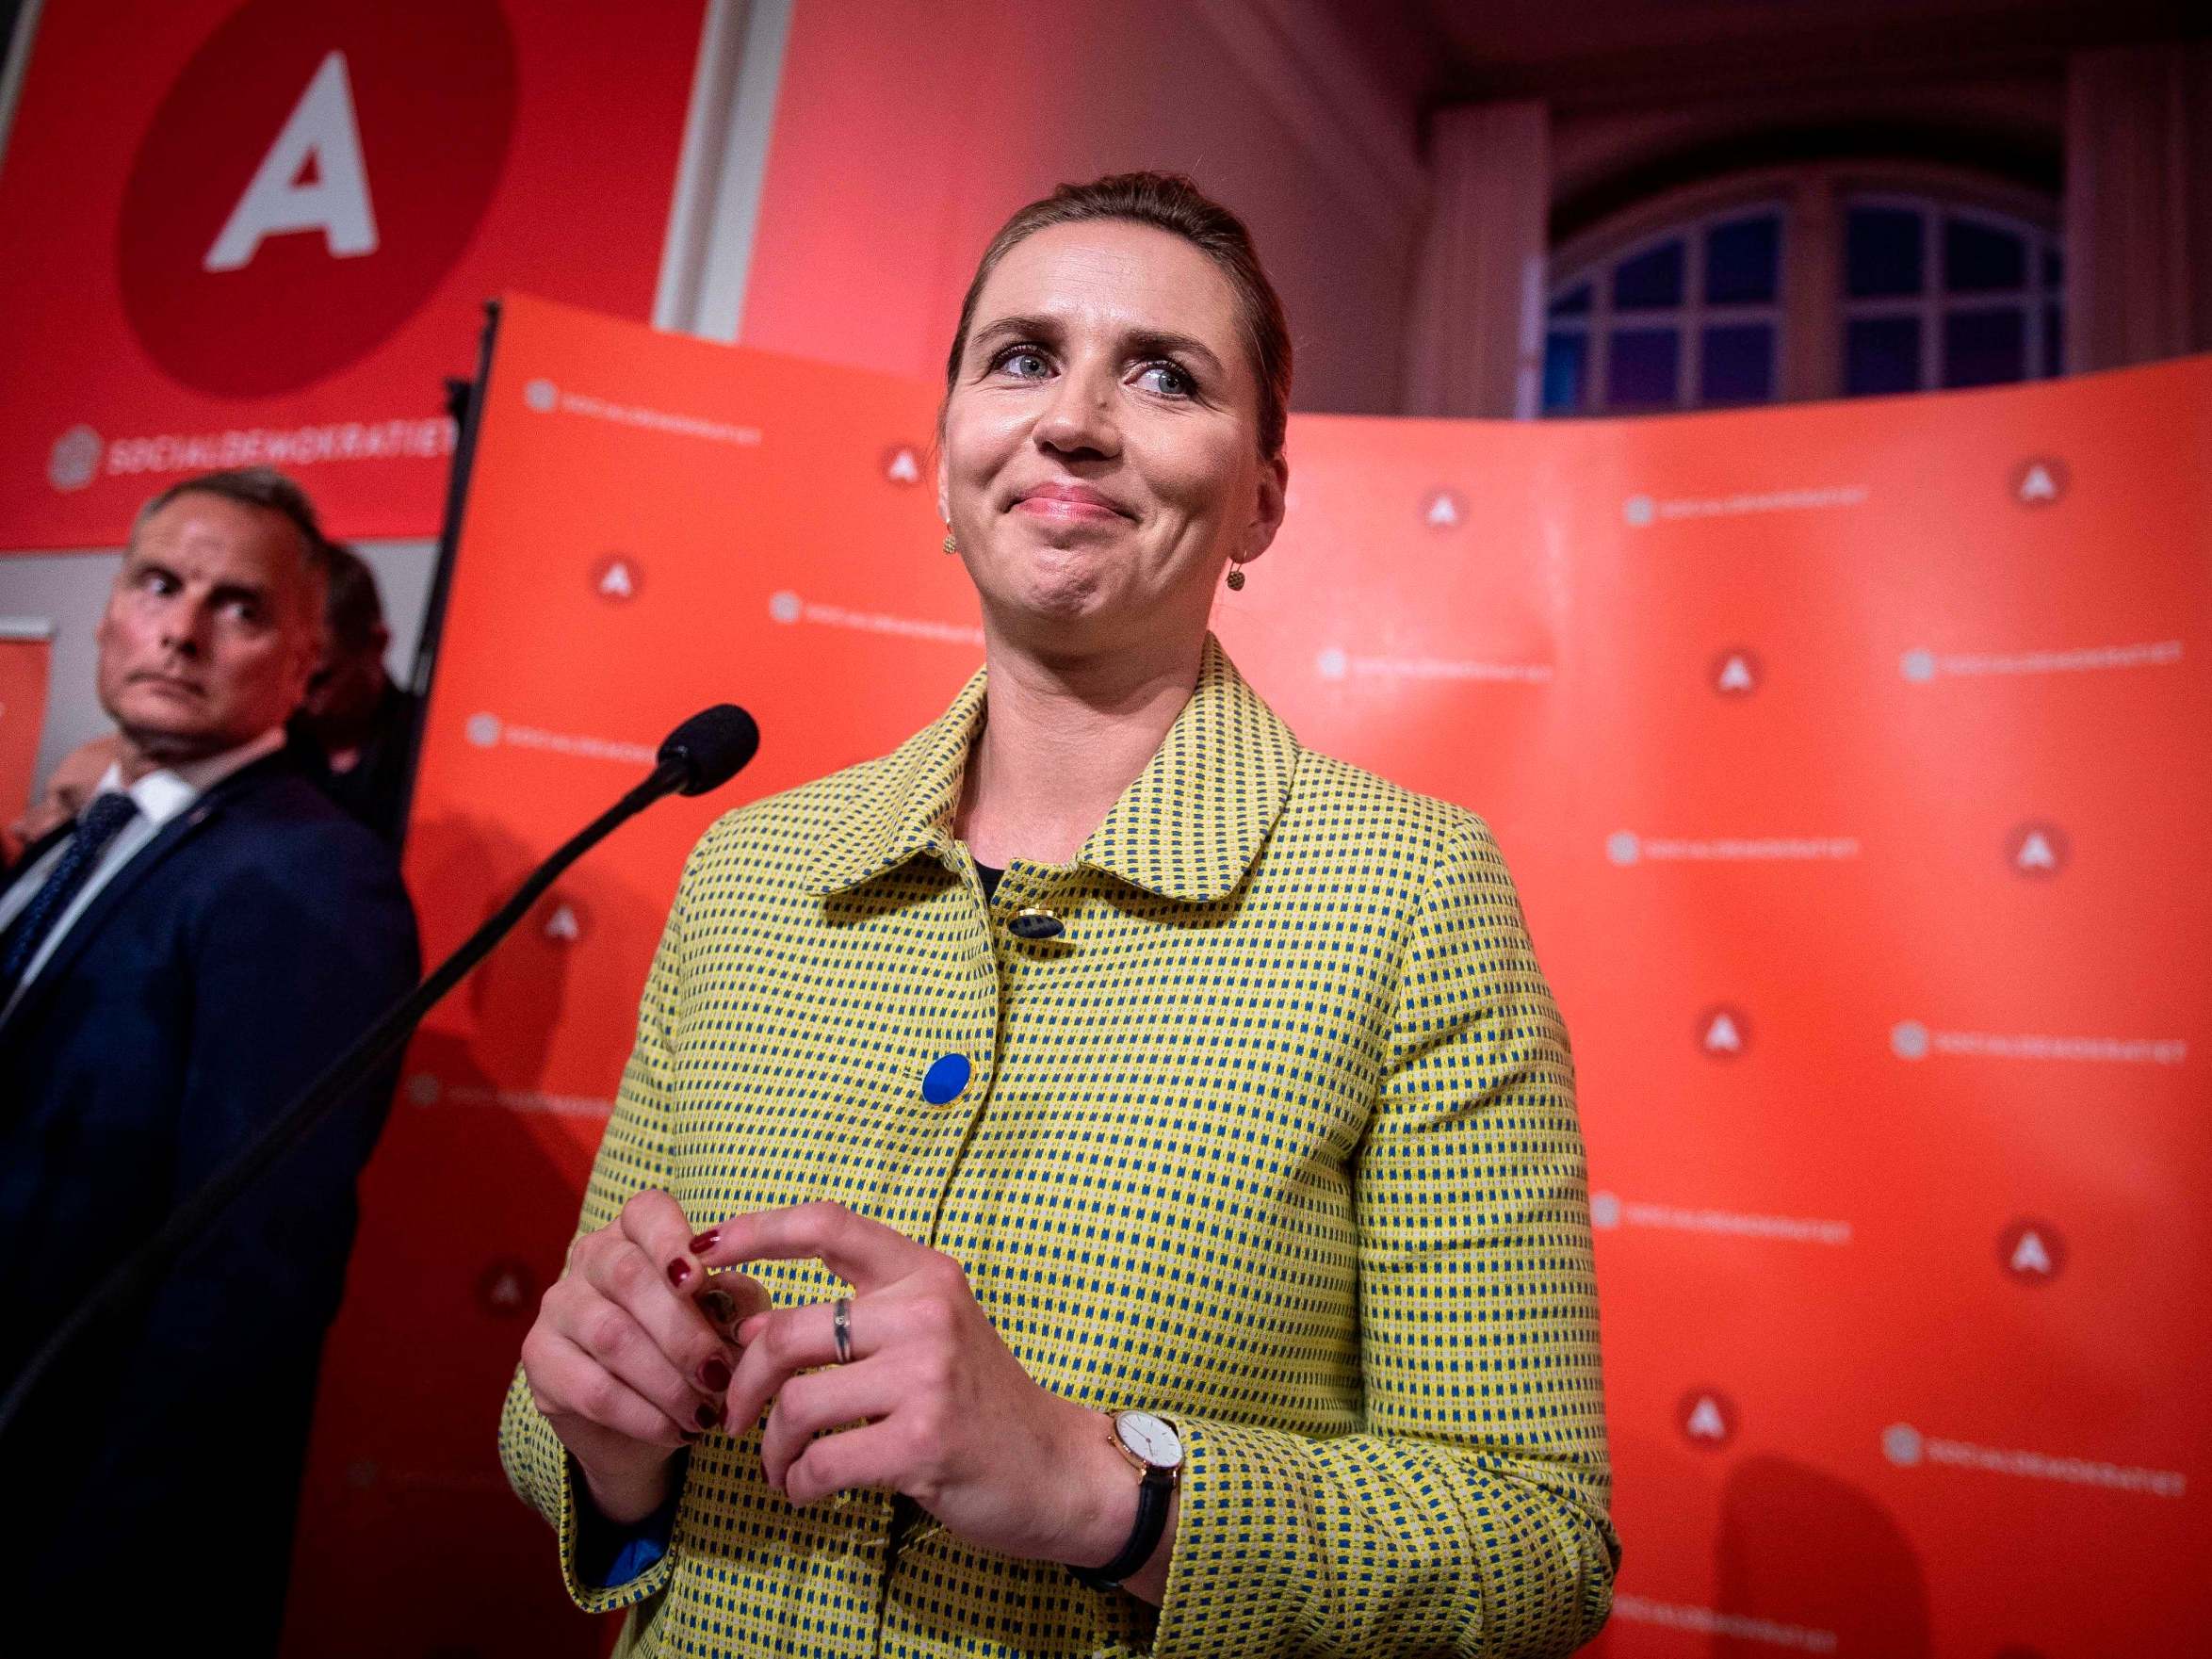 The Social Democrats' Mette Frederiksen has said her party will try to govern as a minority rather than form a coalition